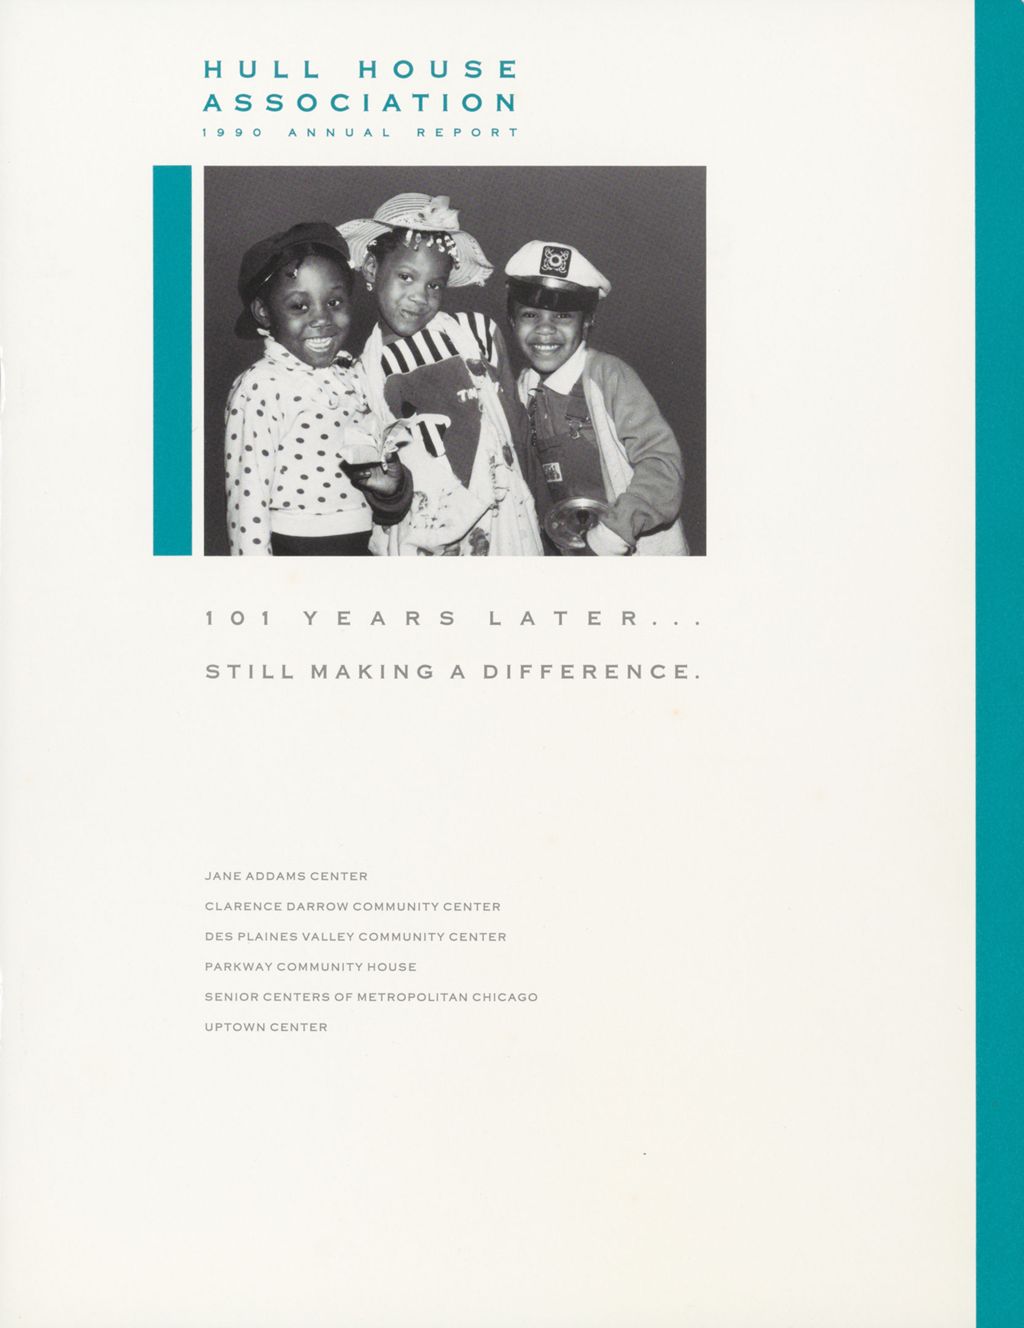 Miniature of Hull House Association, Annual Report, 1990